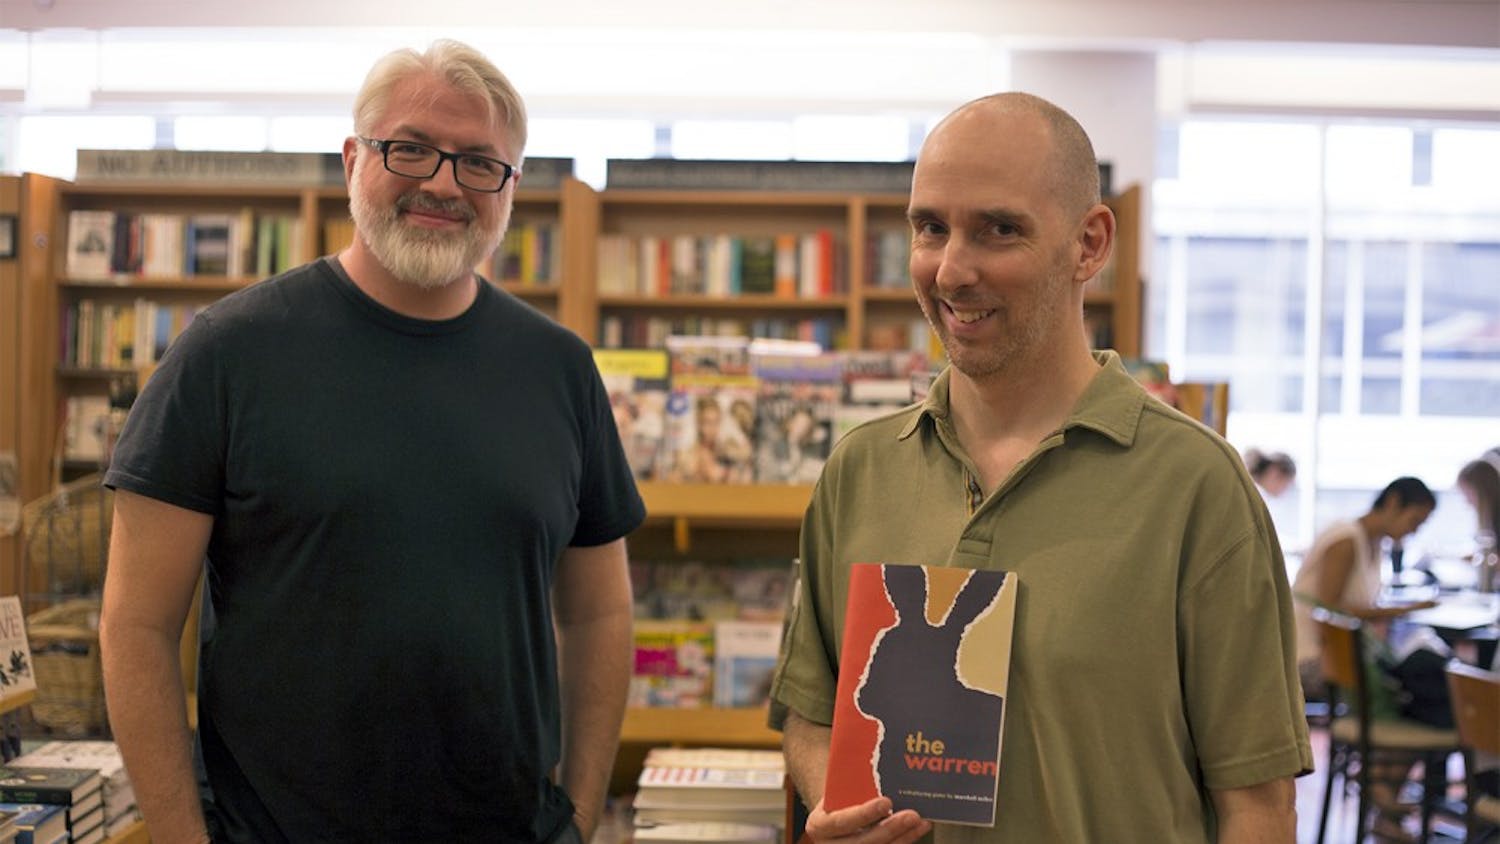 Steve Segedy (left) and Jason Morningstar, application analysts at UNC, stand in Bullhead's Bookshop with some of the books they have written. The two have recently developed Warren, a role-playing game based on the classic novel Watership Down. 